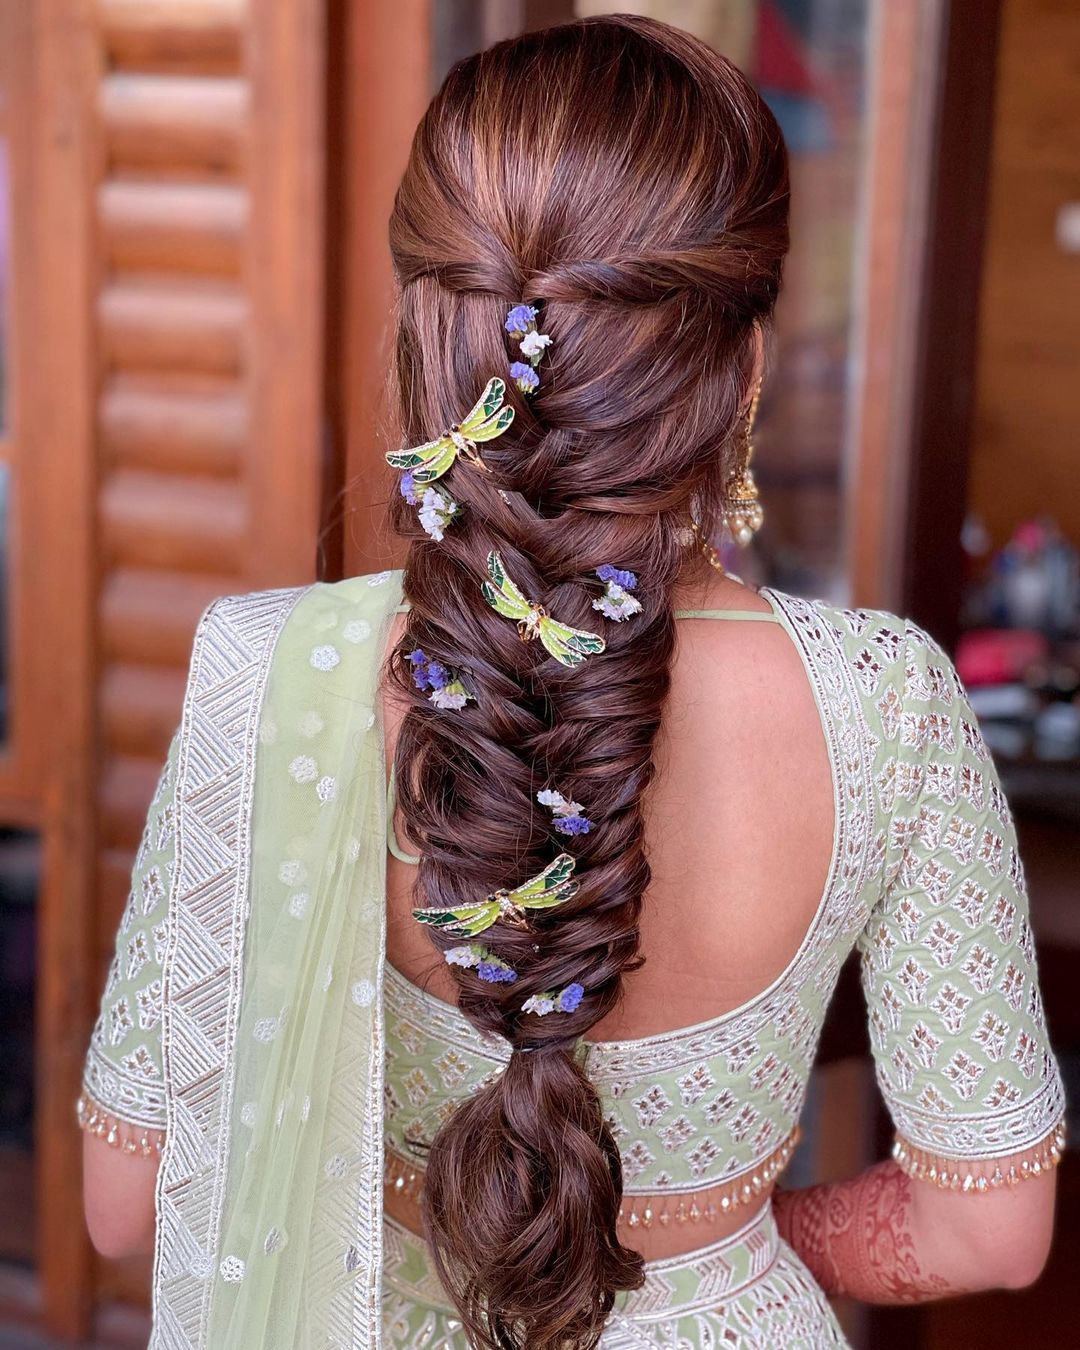 Bridal Hairstyles To Flatter Your Face Shape